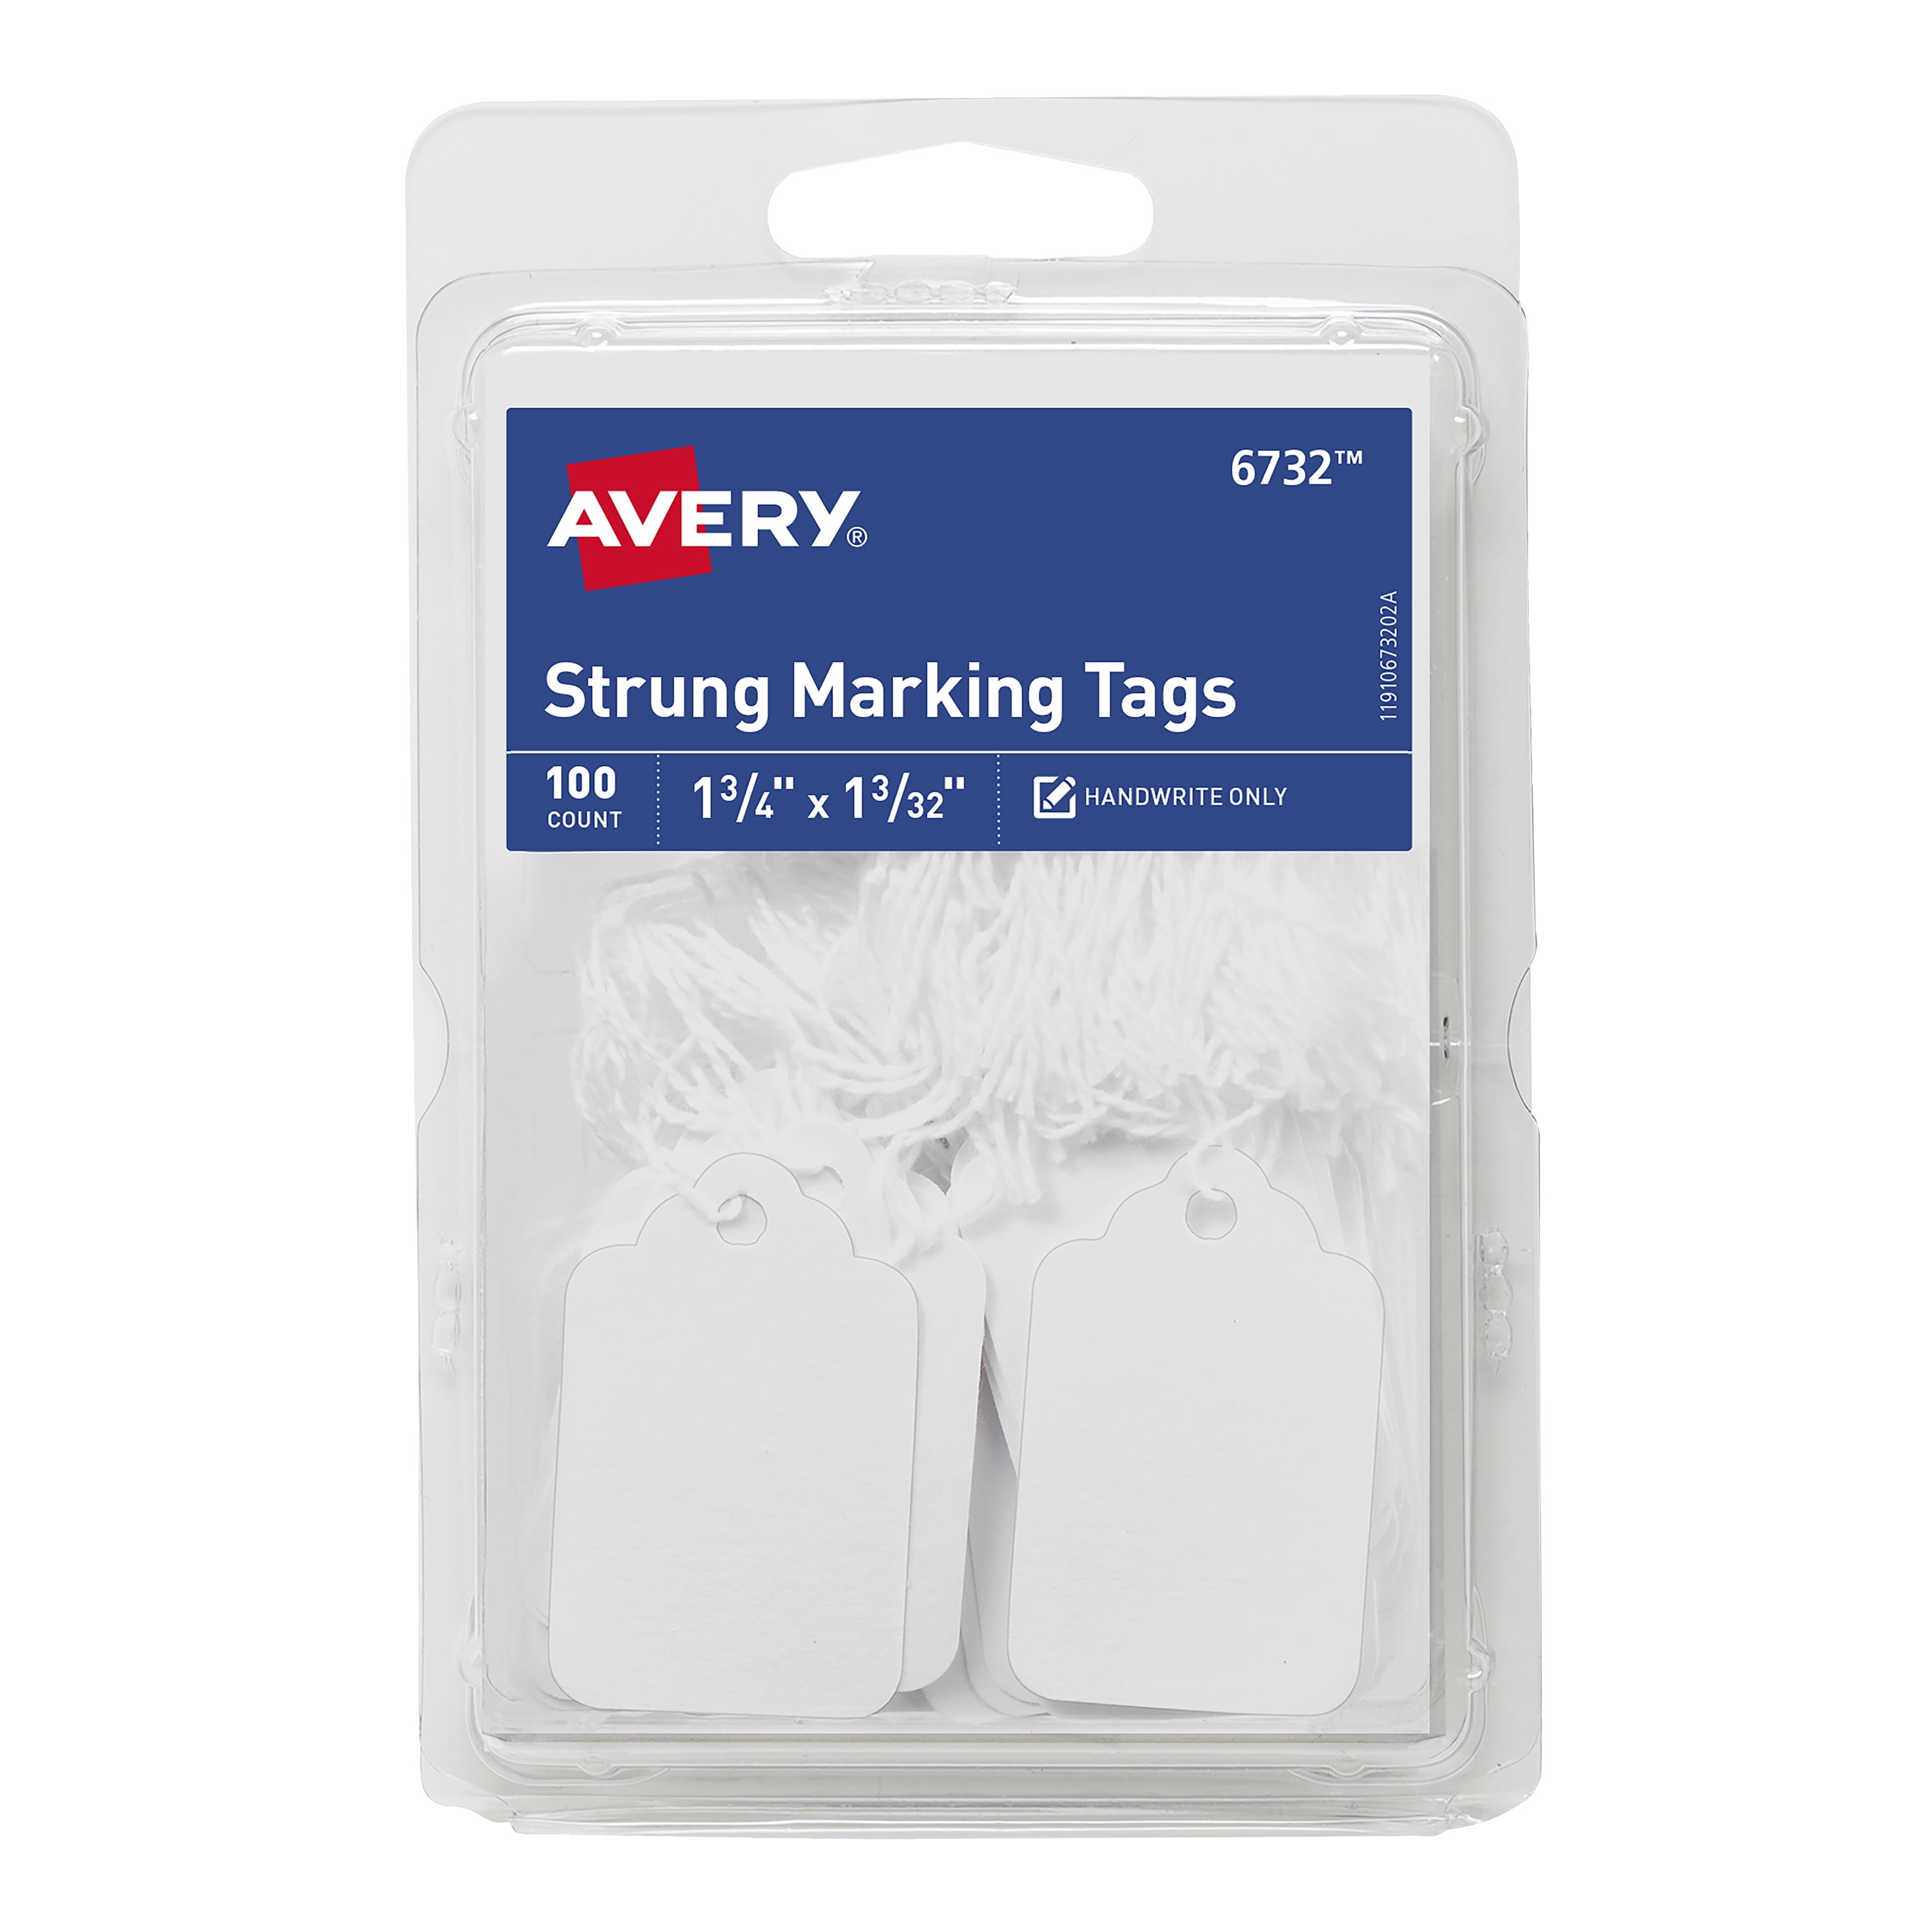 100 Large Price Tags with Strings White 2 part Garment Tag 